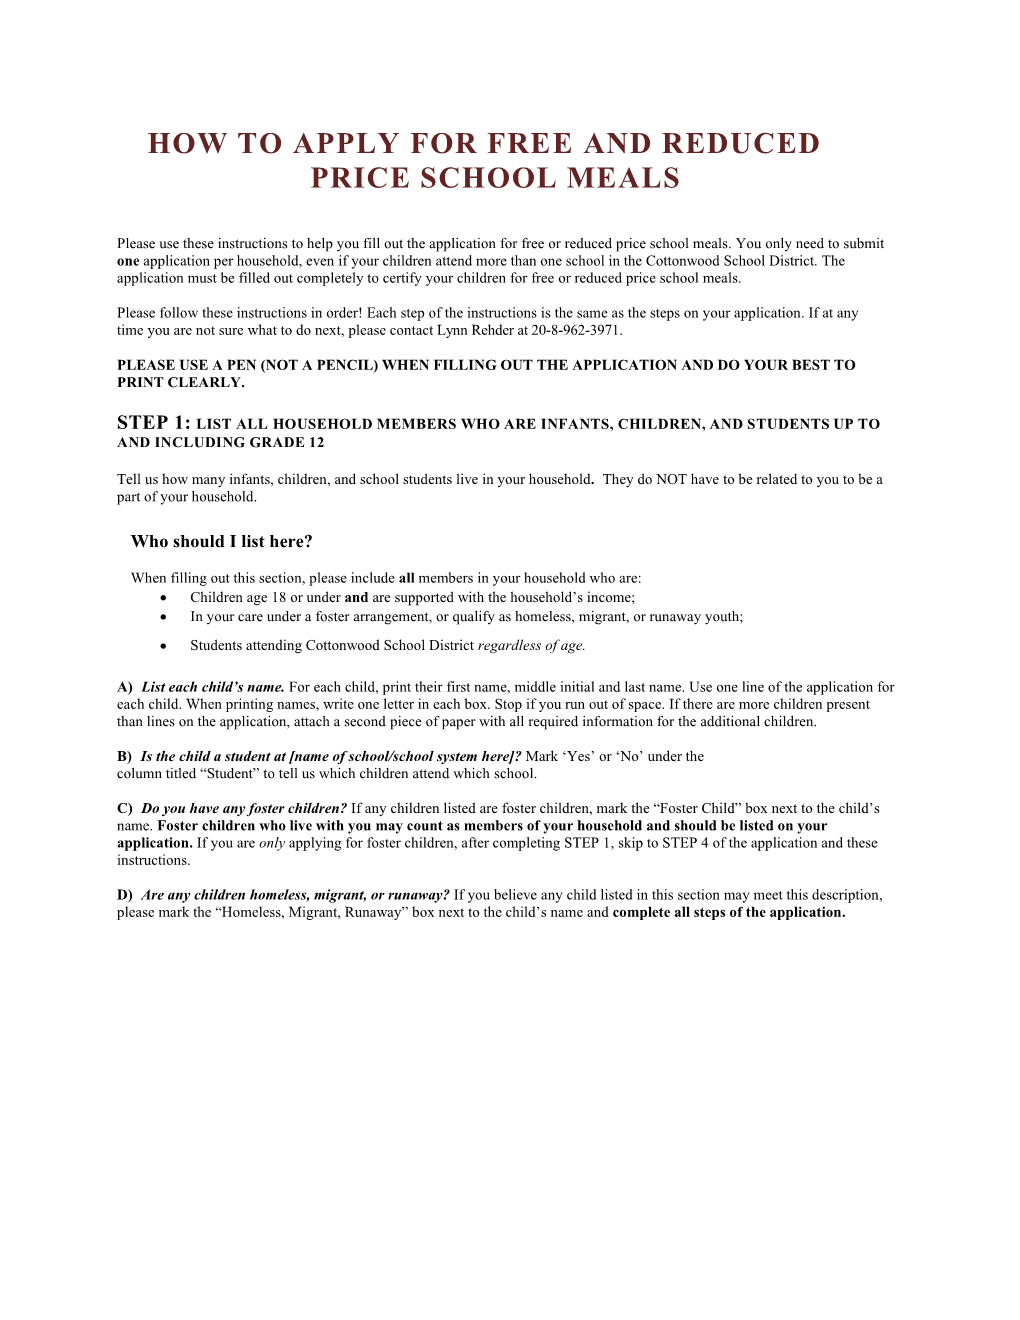 SP 33-2015A: Information on How to for Free and Reduced Price Meals